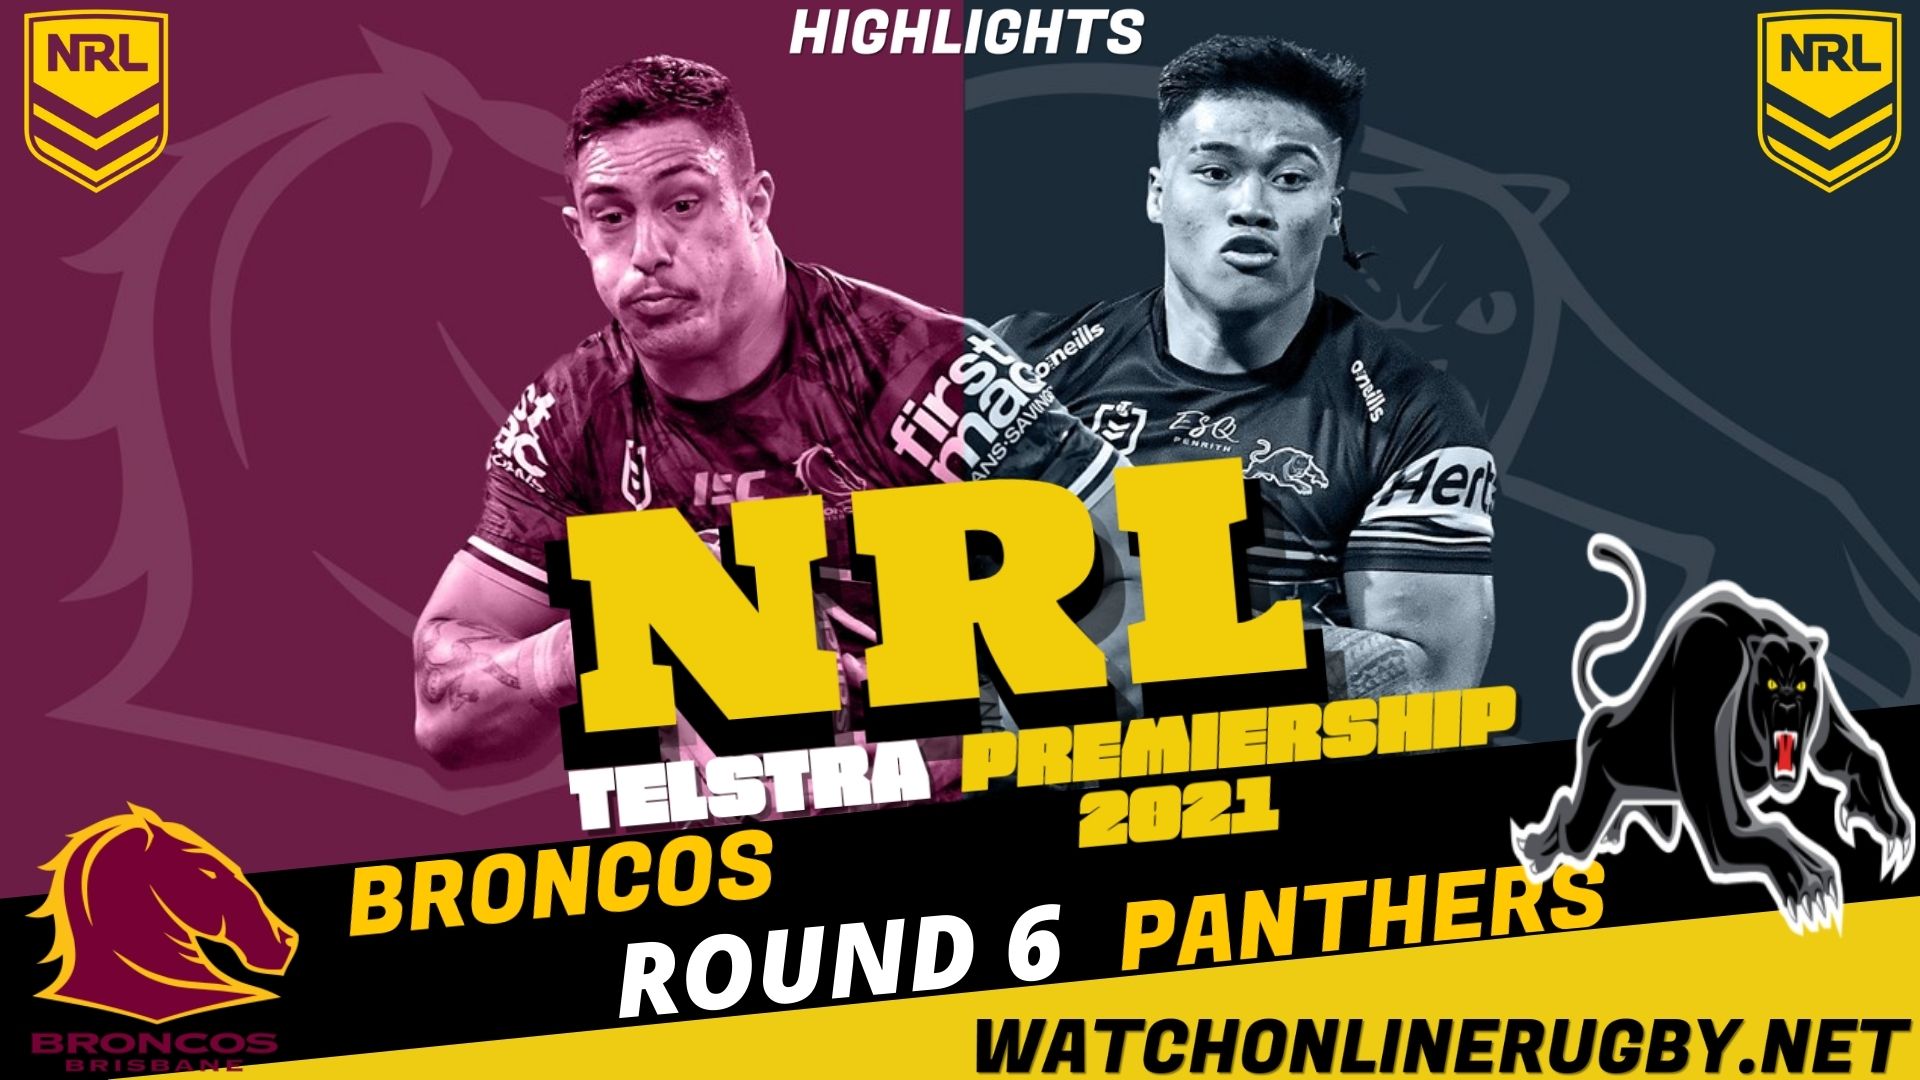 Broncos Vs Panthers Highlights RD 6 NRL Rugby